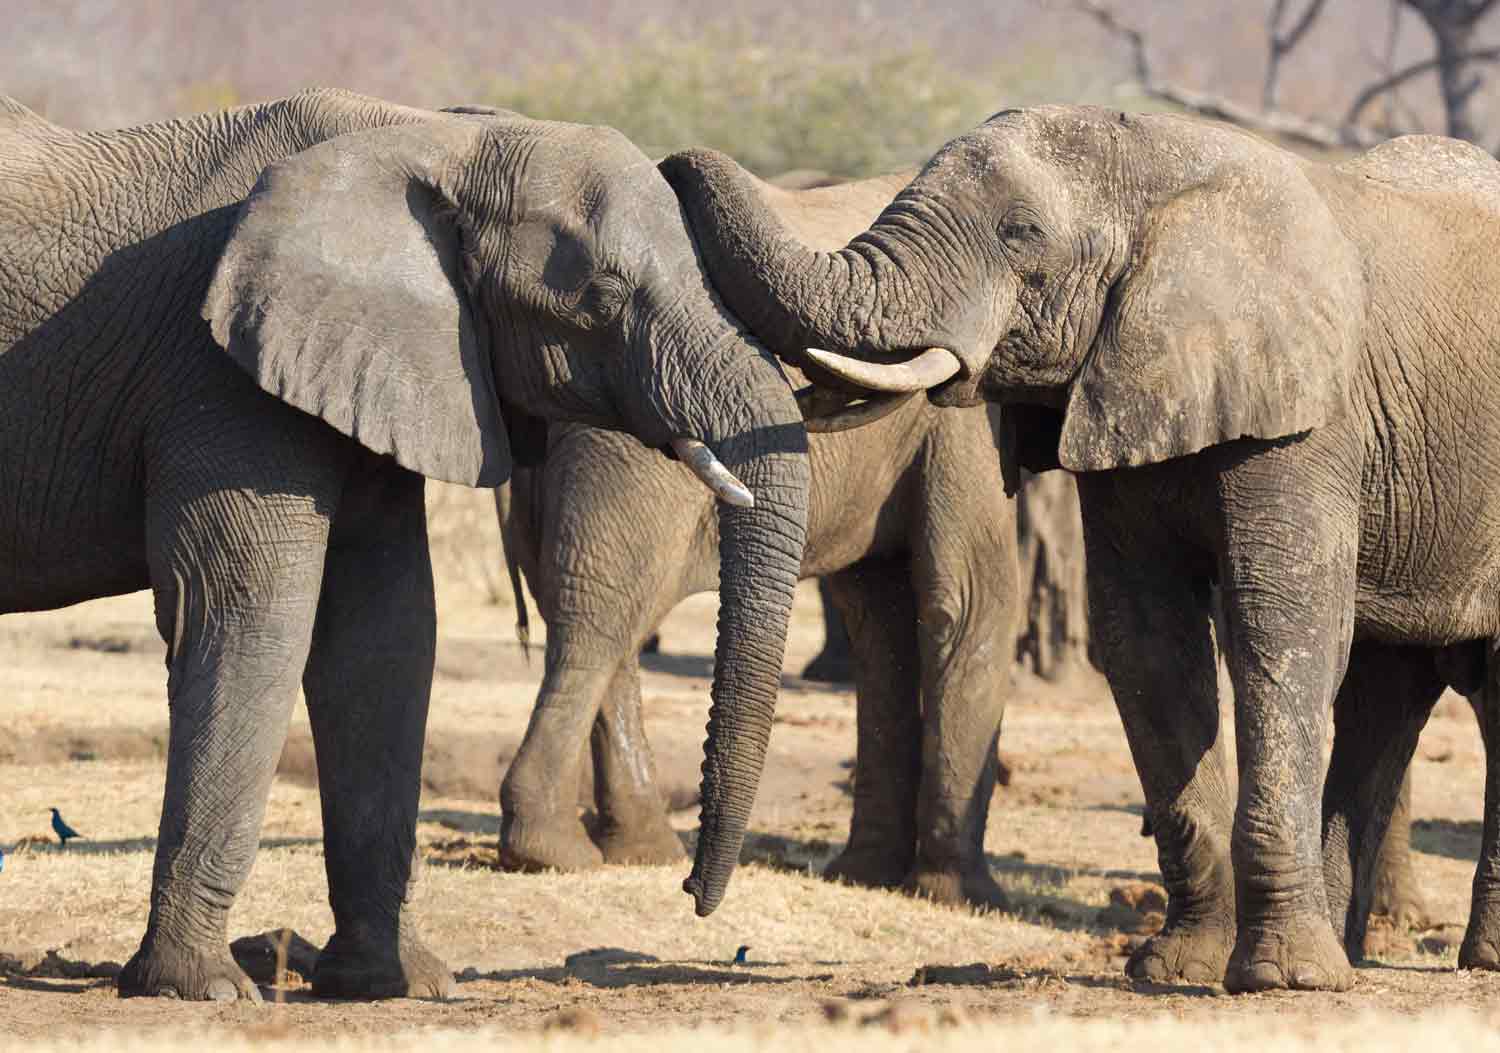 Two African elephants nuzzle each other while other elephants are standing in the background.